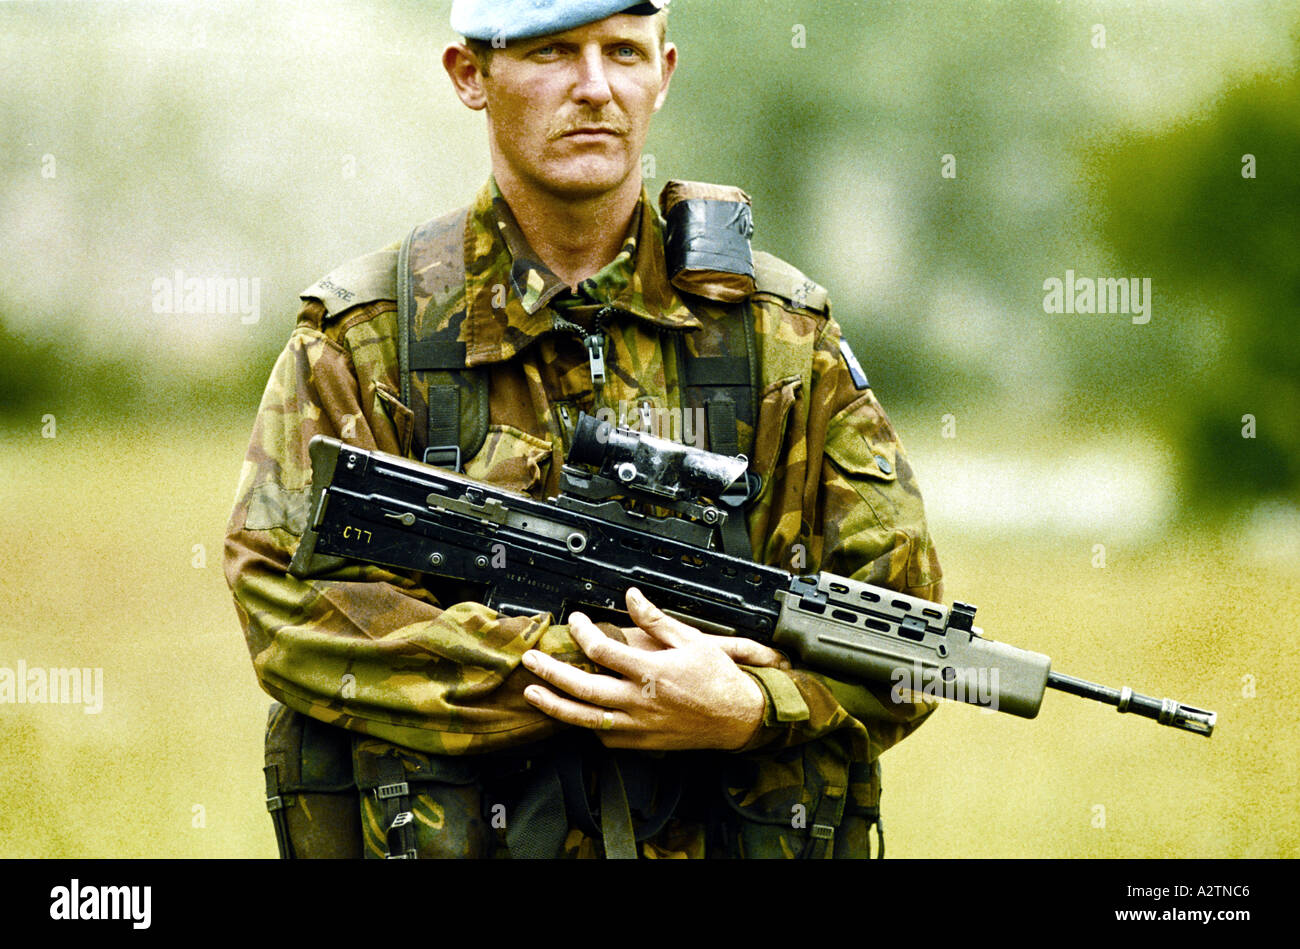 central bosnia june 1995 british soldier during training Stock Photo